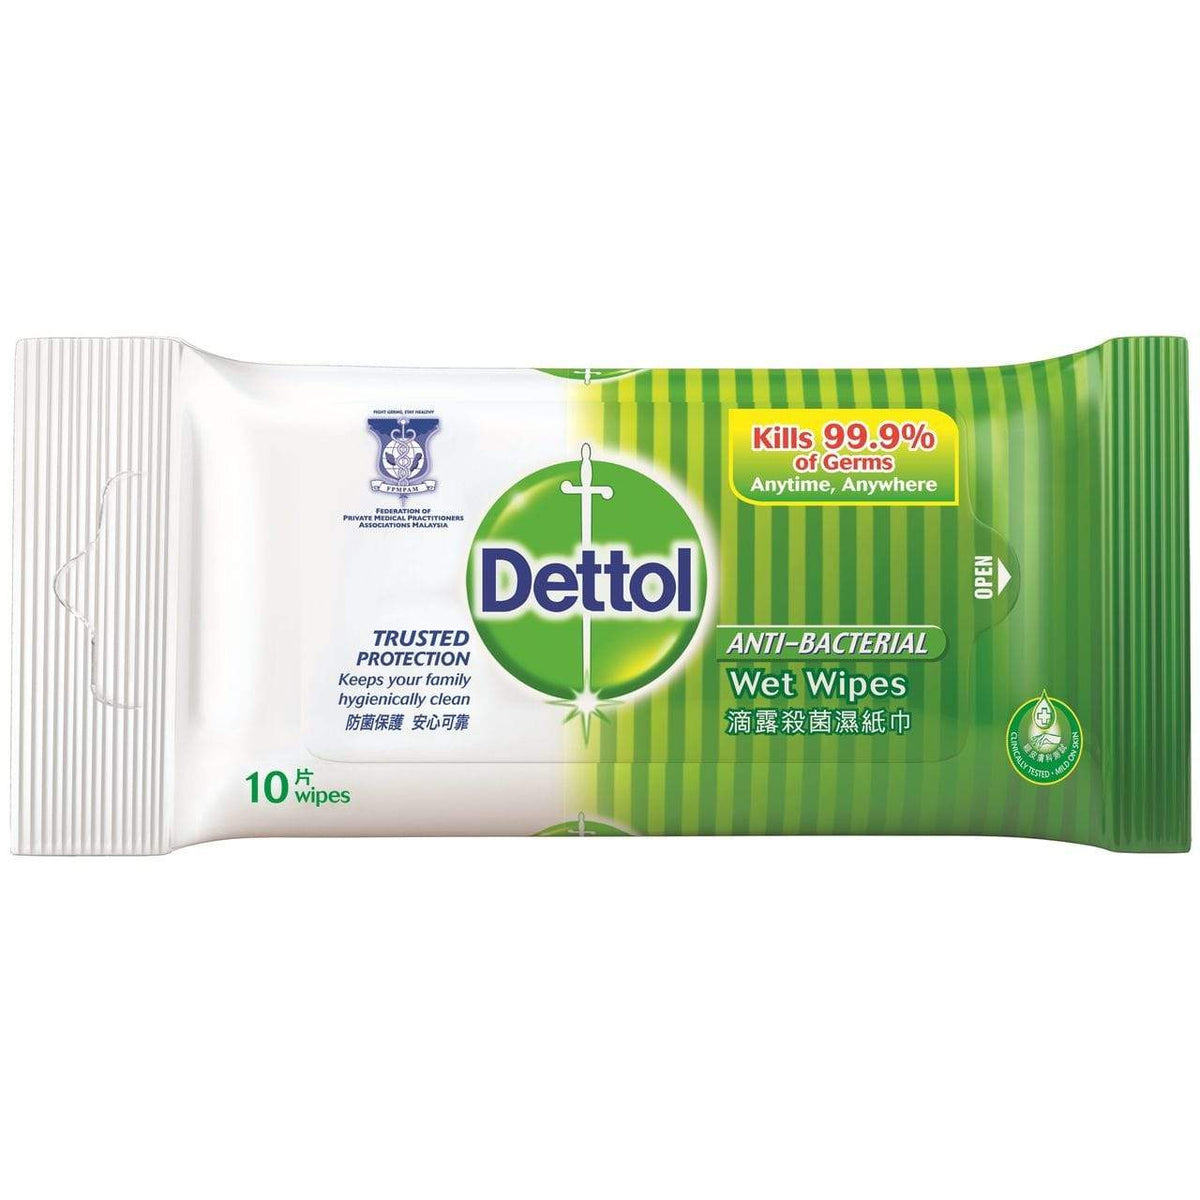 Dettol - Anti Bacterial Wet Wipes DT1002 CherryAffairs